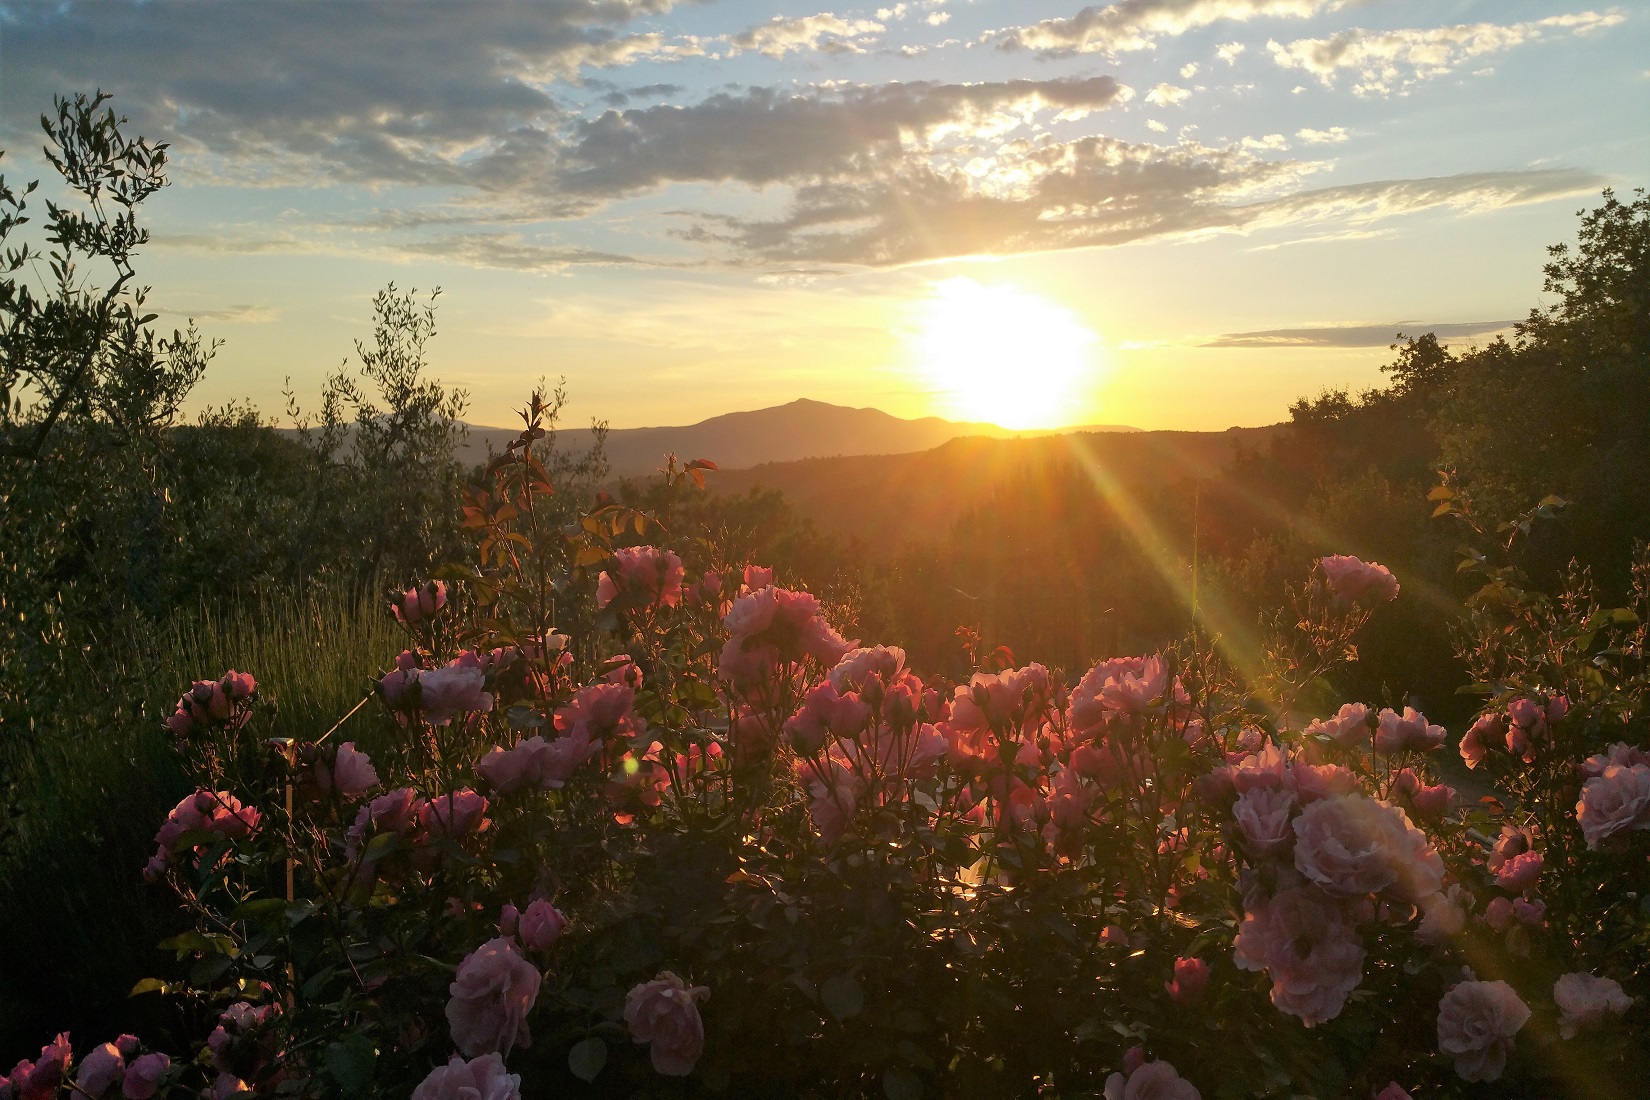 Between Umbria and Tuscany, the stunning Tramonto A Parrano farmhouse location